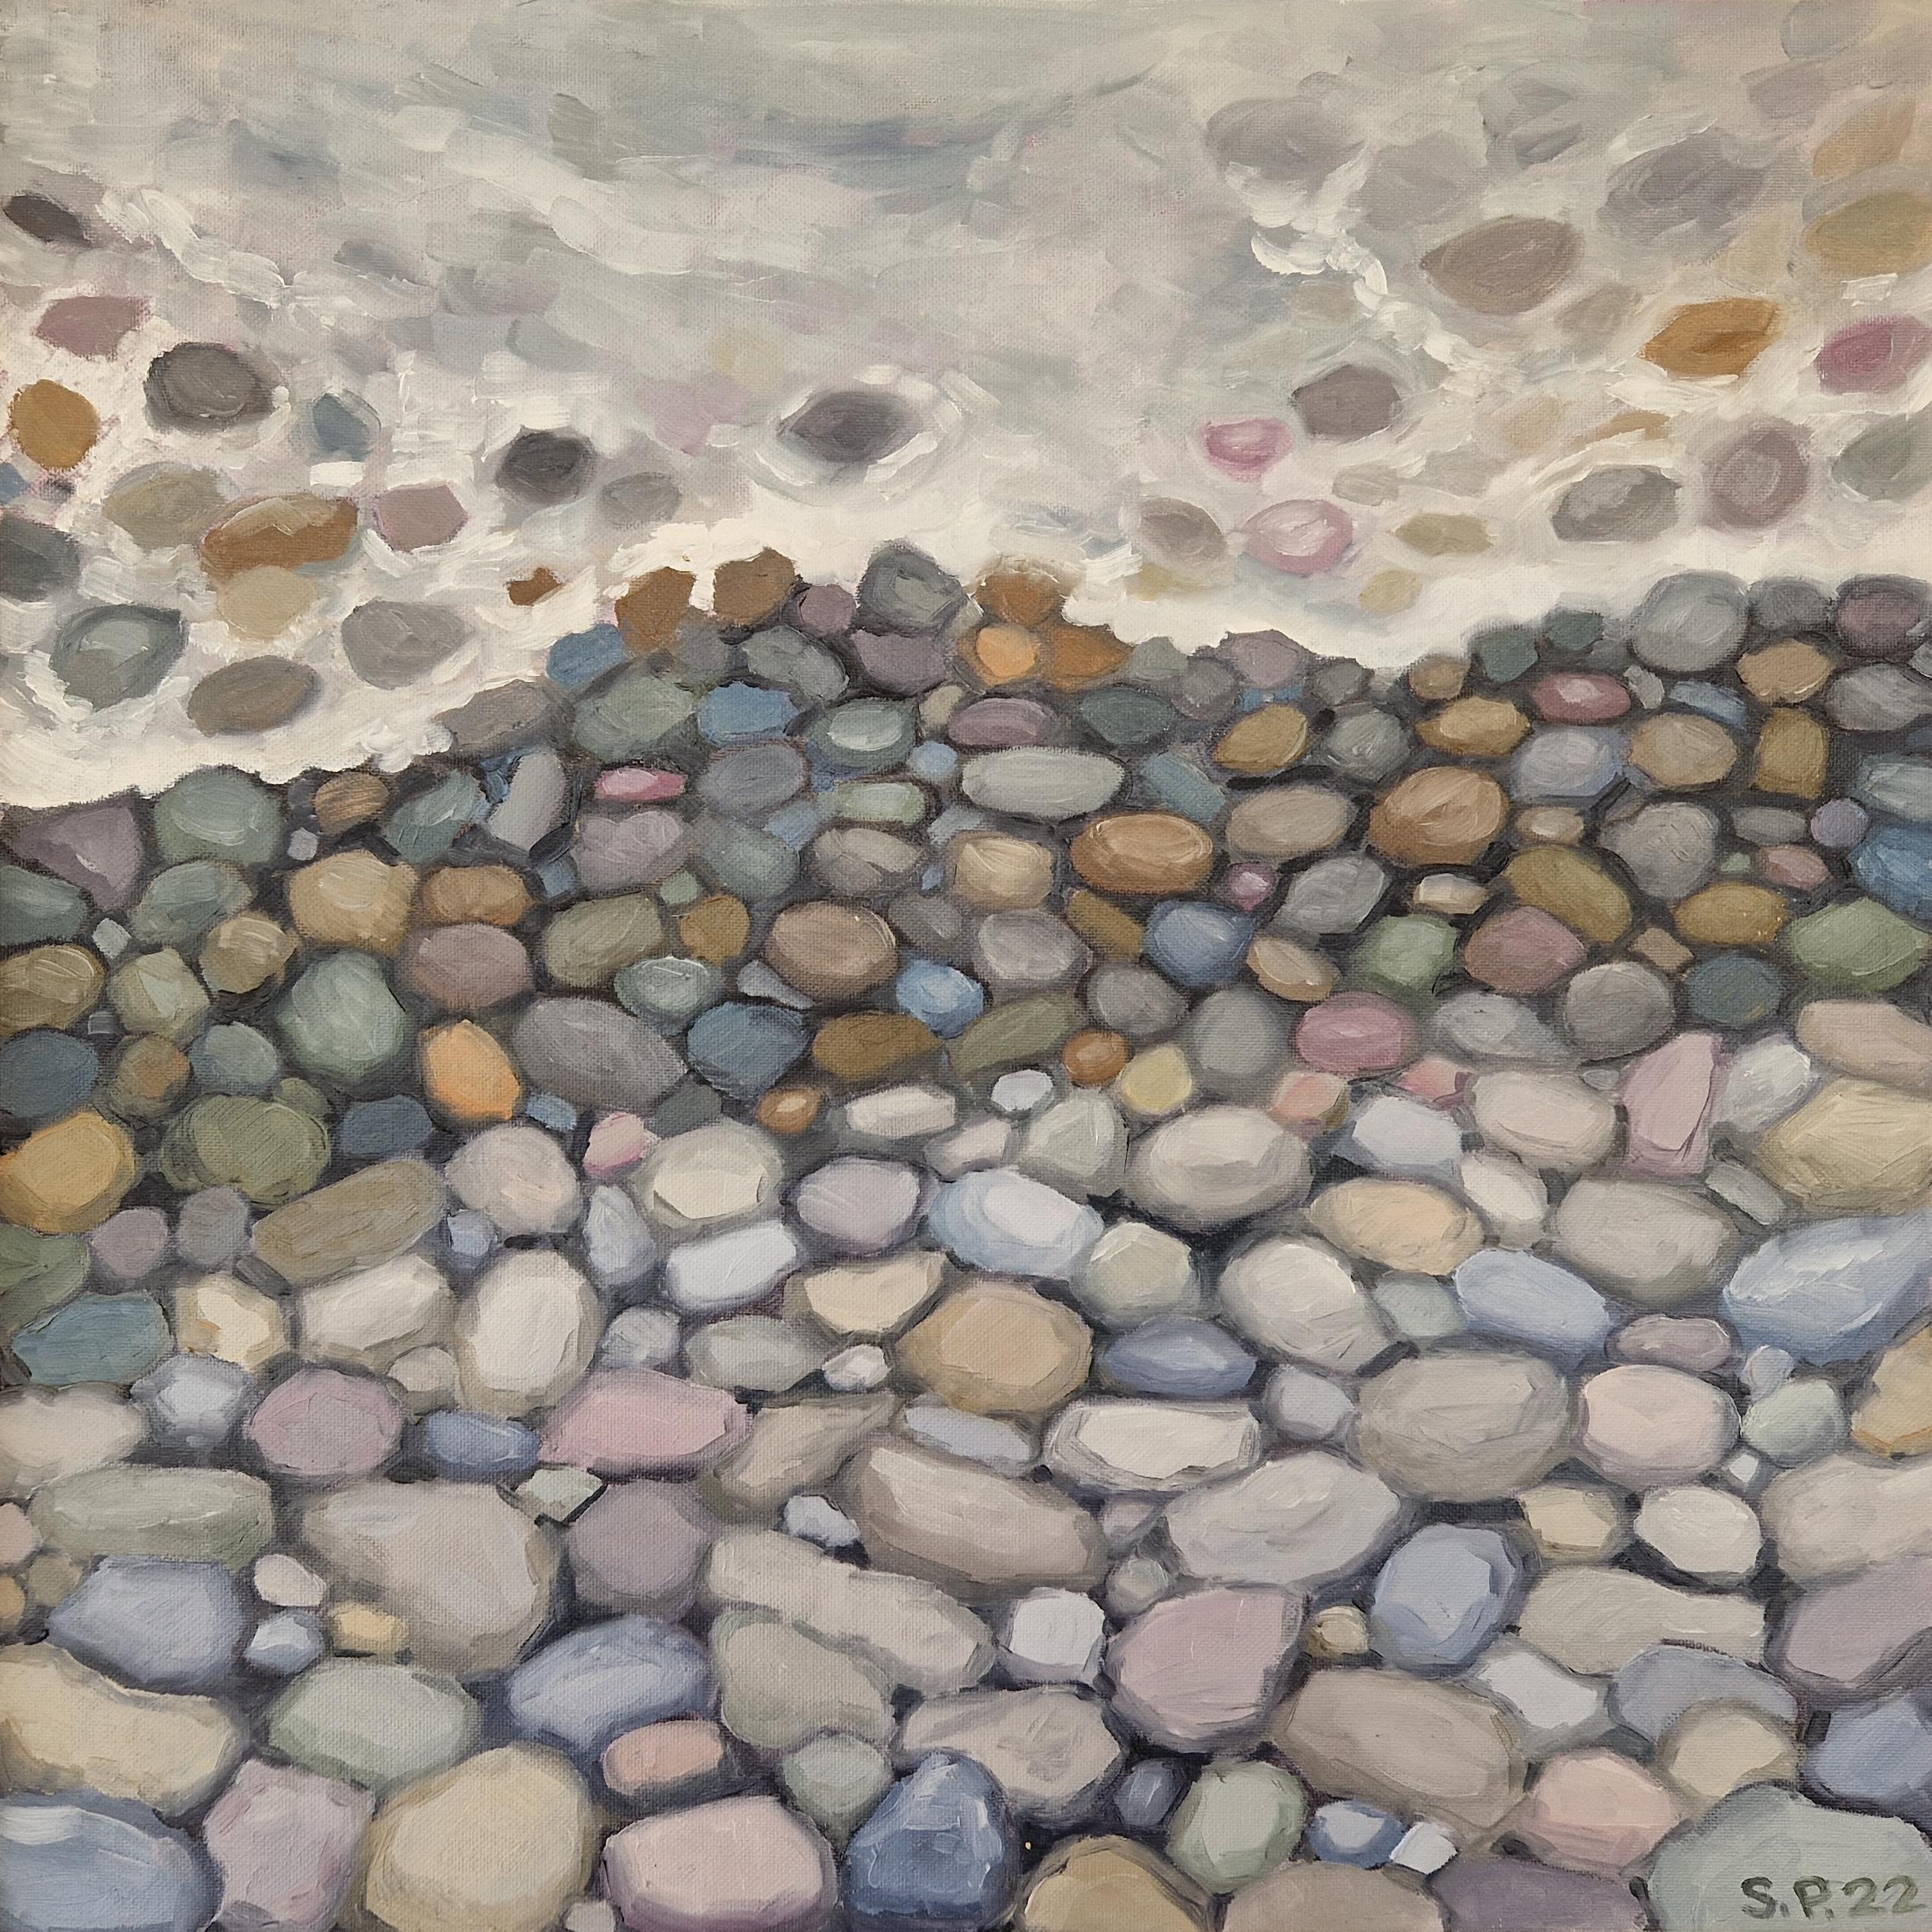 The painting 'Pebbles 1'.